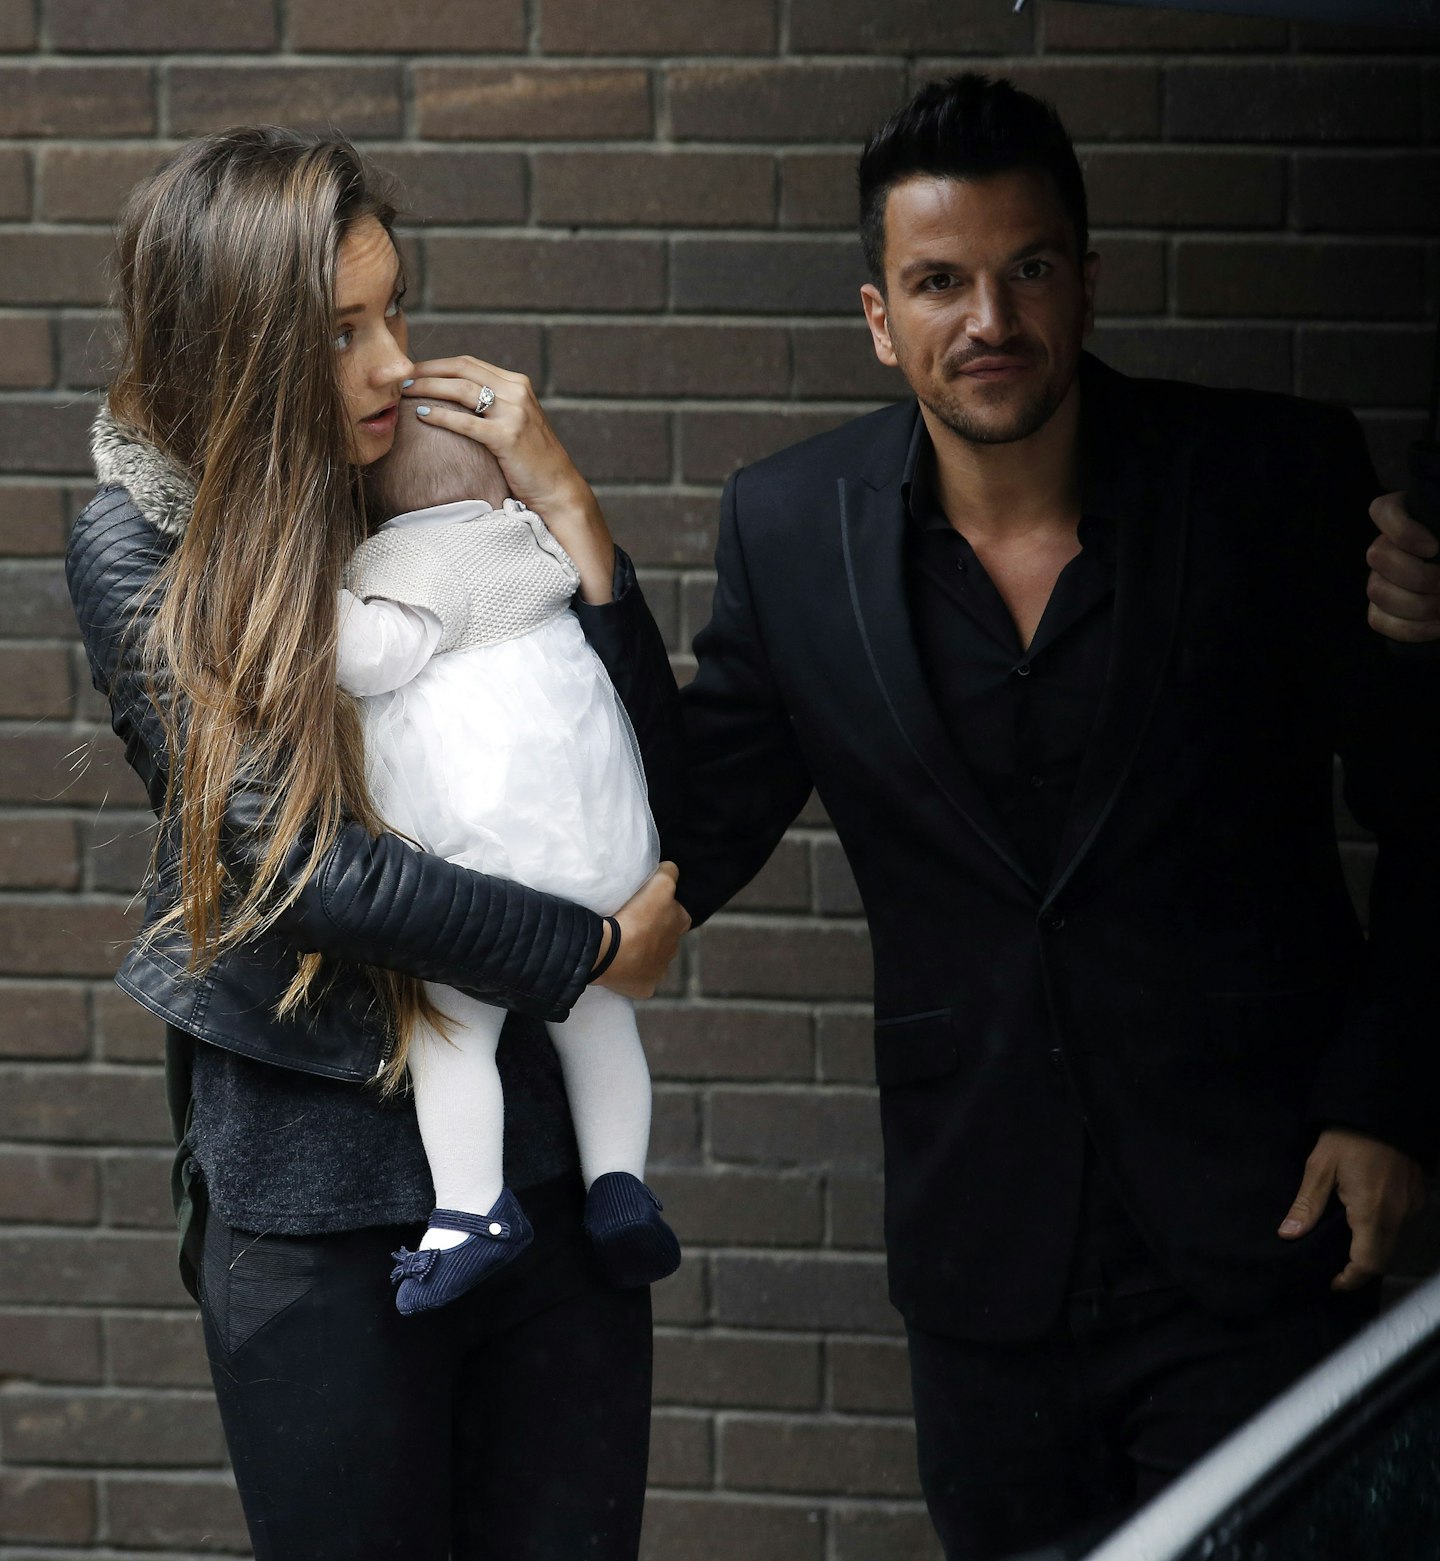 emily andre peter andre amelia andre